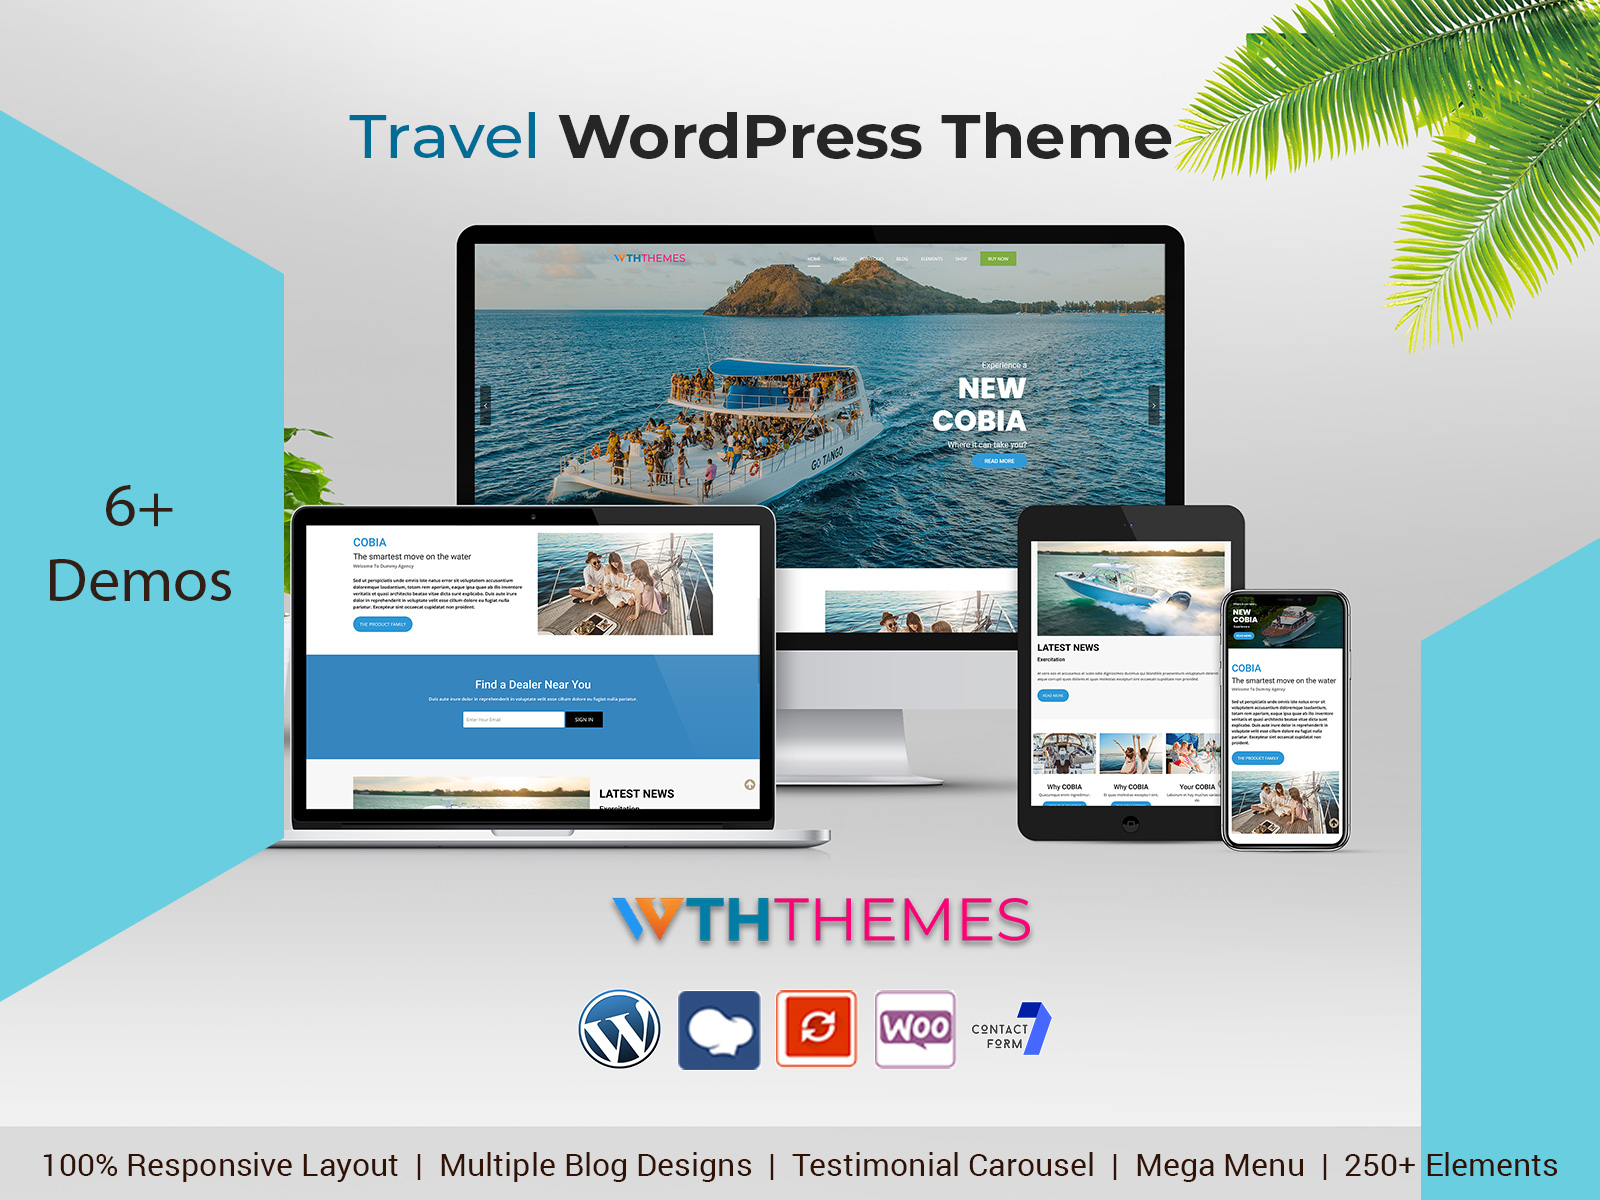 Unleash Your Creativity With A Travel WordPress Theme